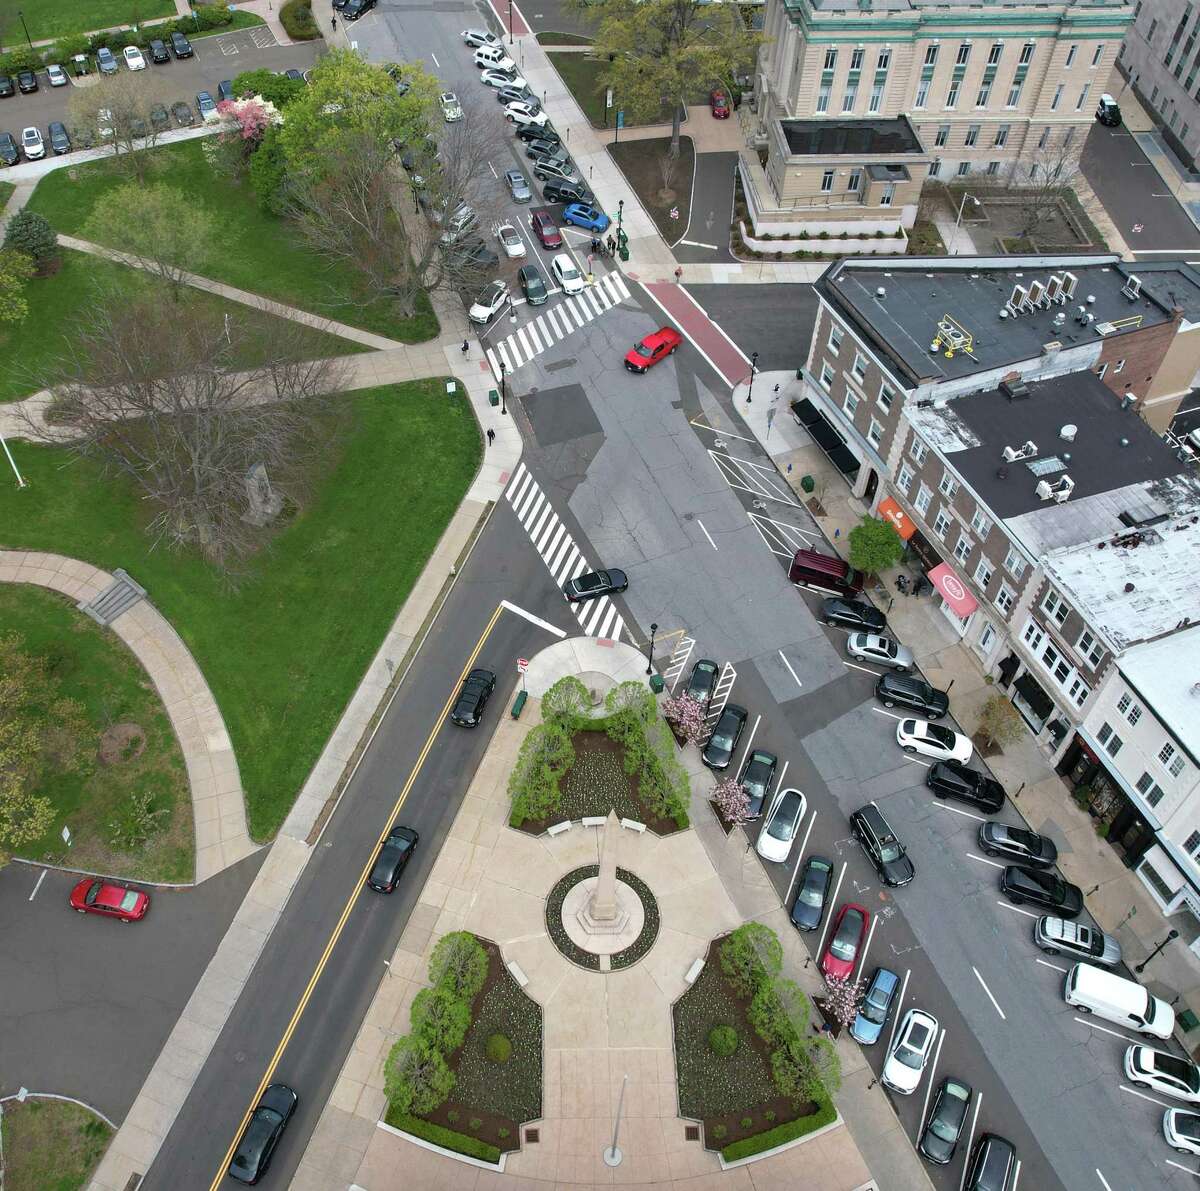 The intersection of Greenwich Avenue and Arch Street, where a new bumpout has been proposed to be built, in Greenwich, Conn. Tuesday, May 3, 2022. Members of the RTM are proposing a new bumpout to be constructed at the intersection of Greenwich Avenue and Arch Street.